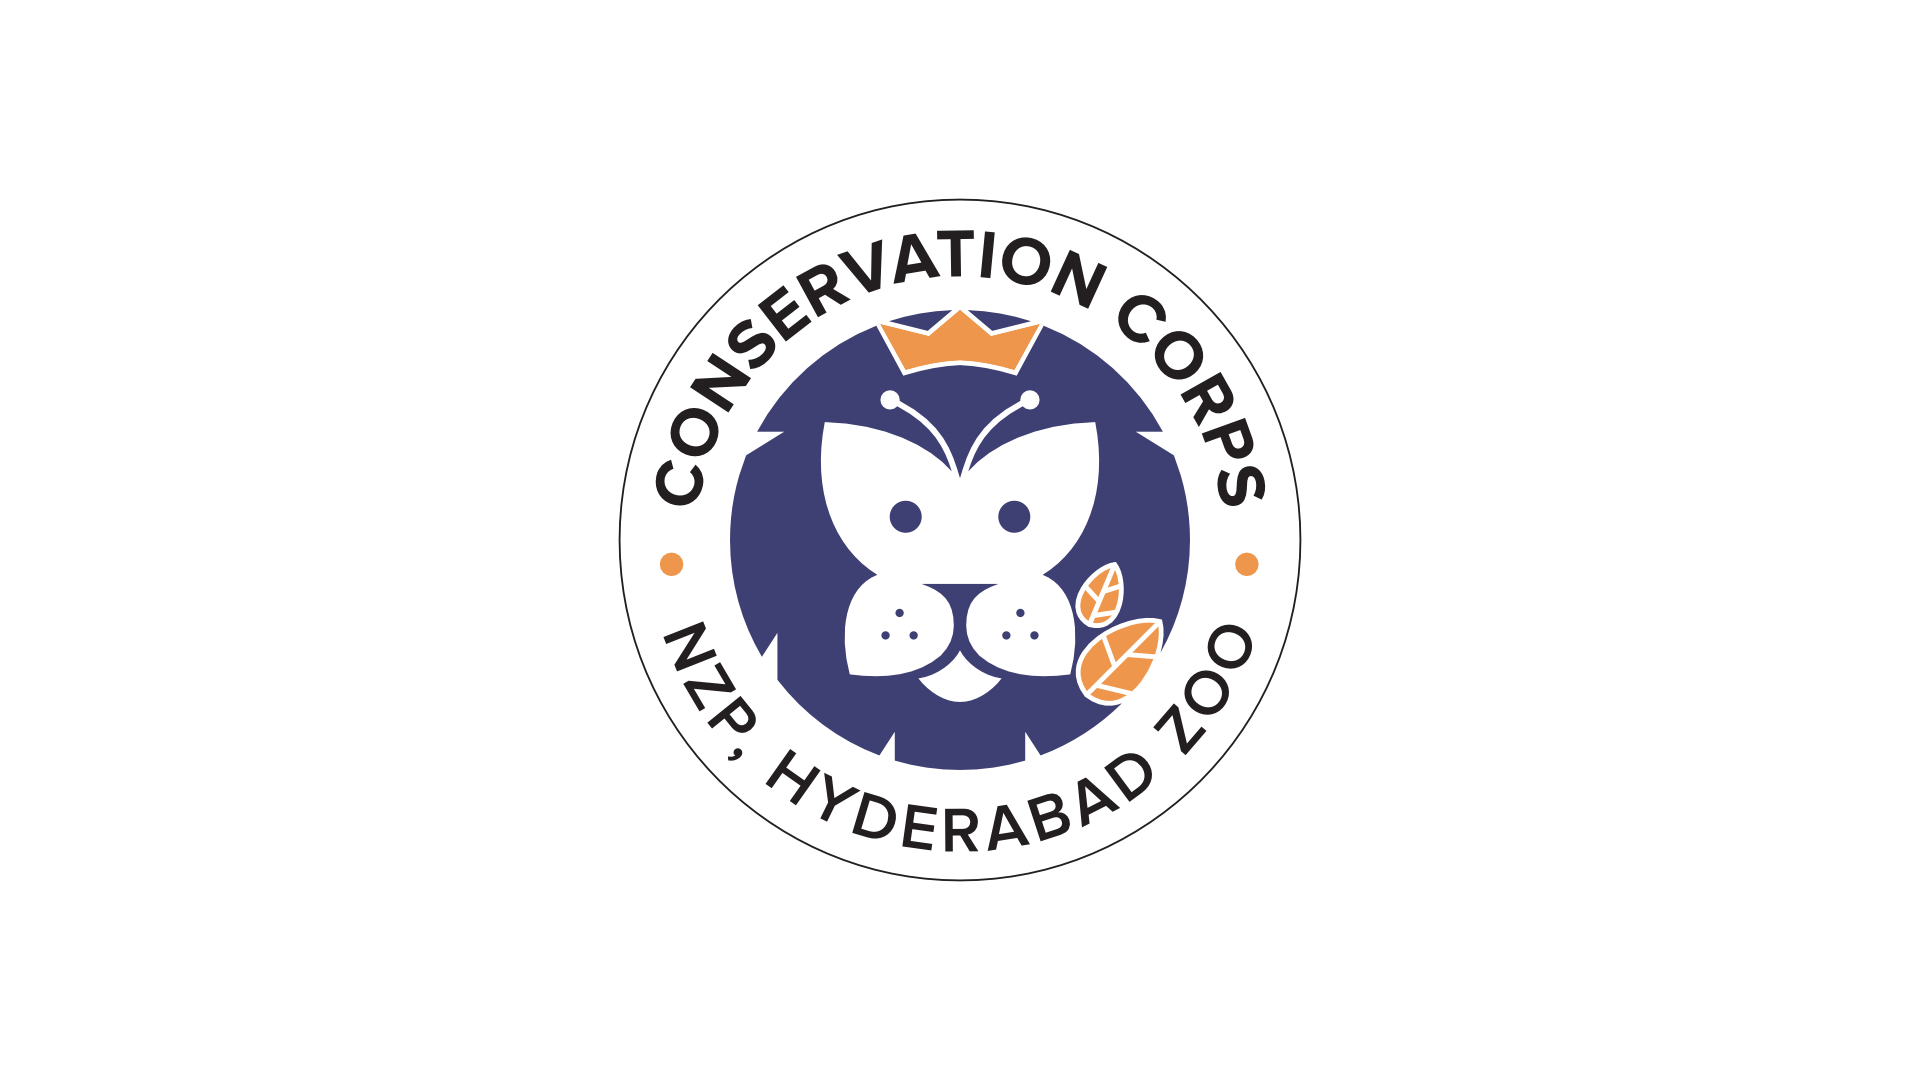 The idea is to come up with a fun and creative logo design for ‘Conservation Corps’. 
This identity has a crown-adorned lions face surrounded by foliage. 
The hidden butterfly feature, asides bringing a huge smile on kids faces, makes it memorable; inspiring them to create a positive impact on our environment.